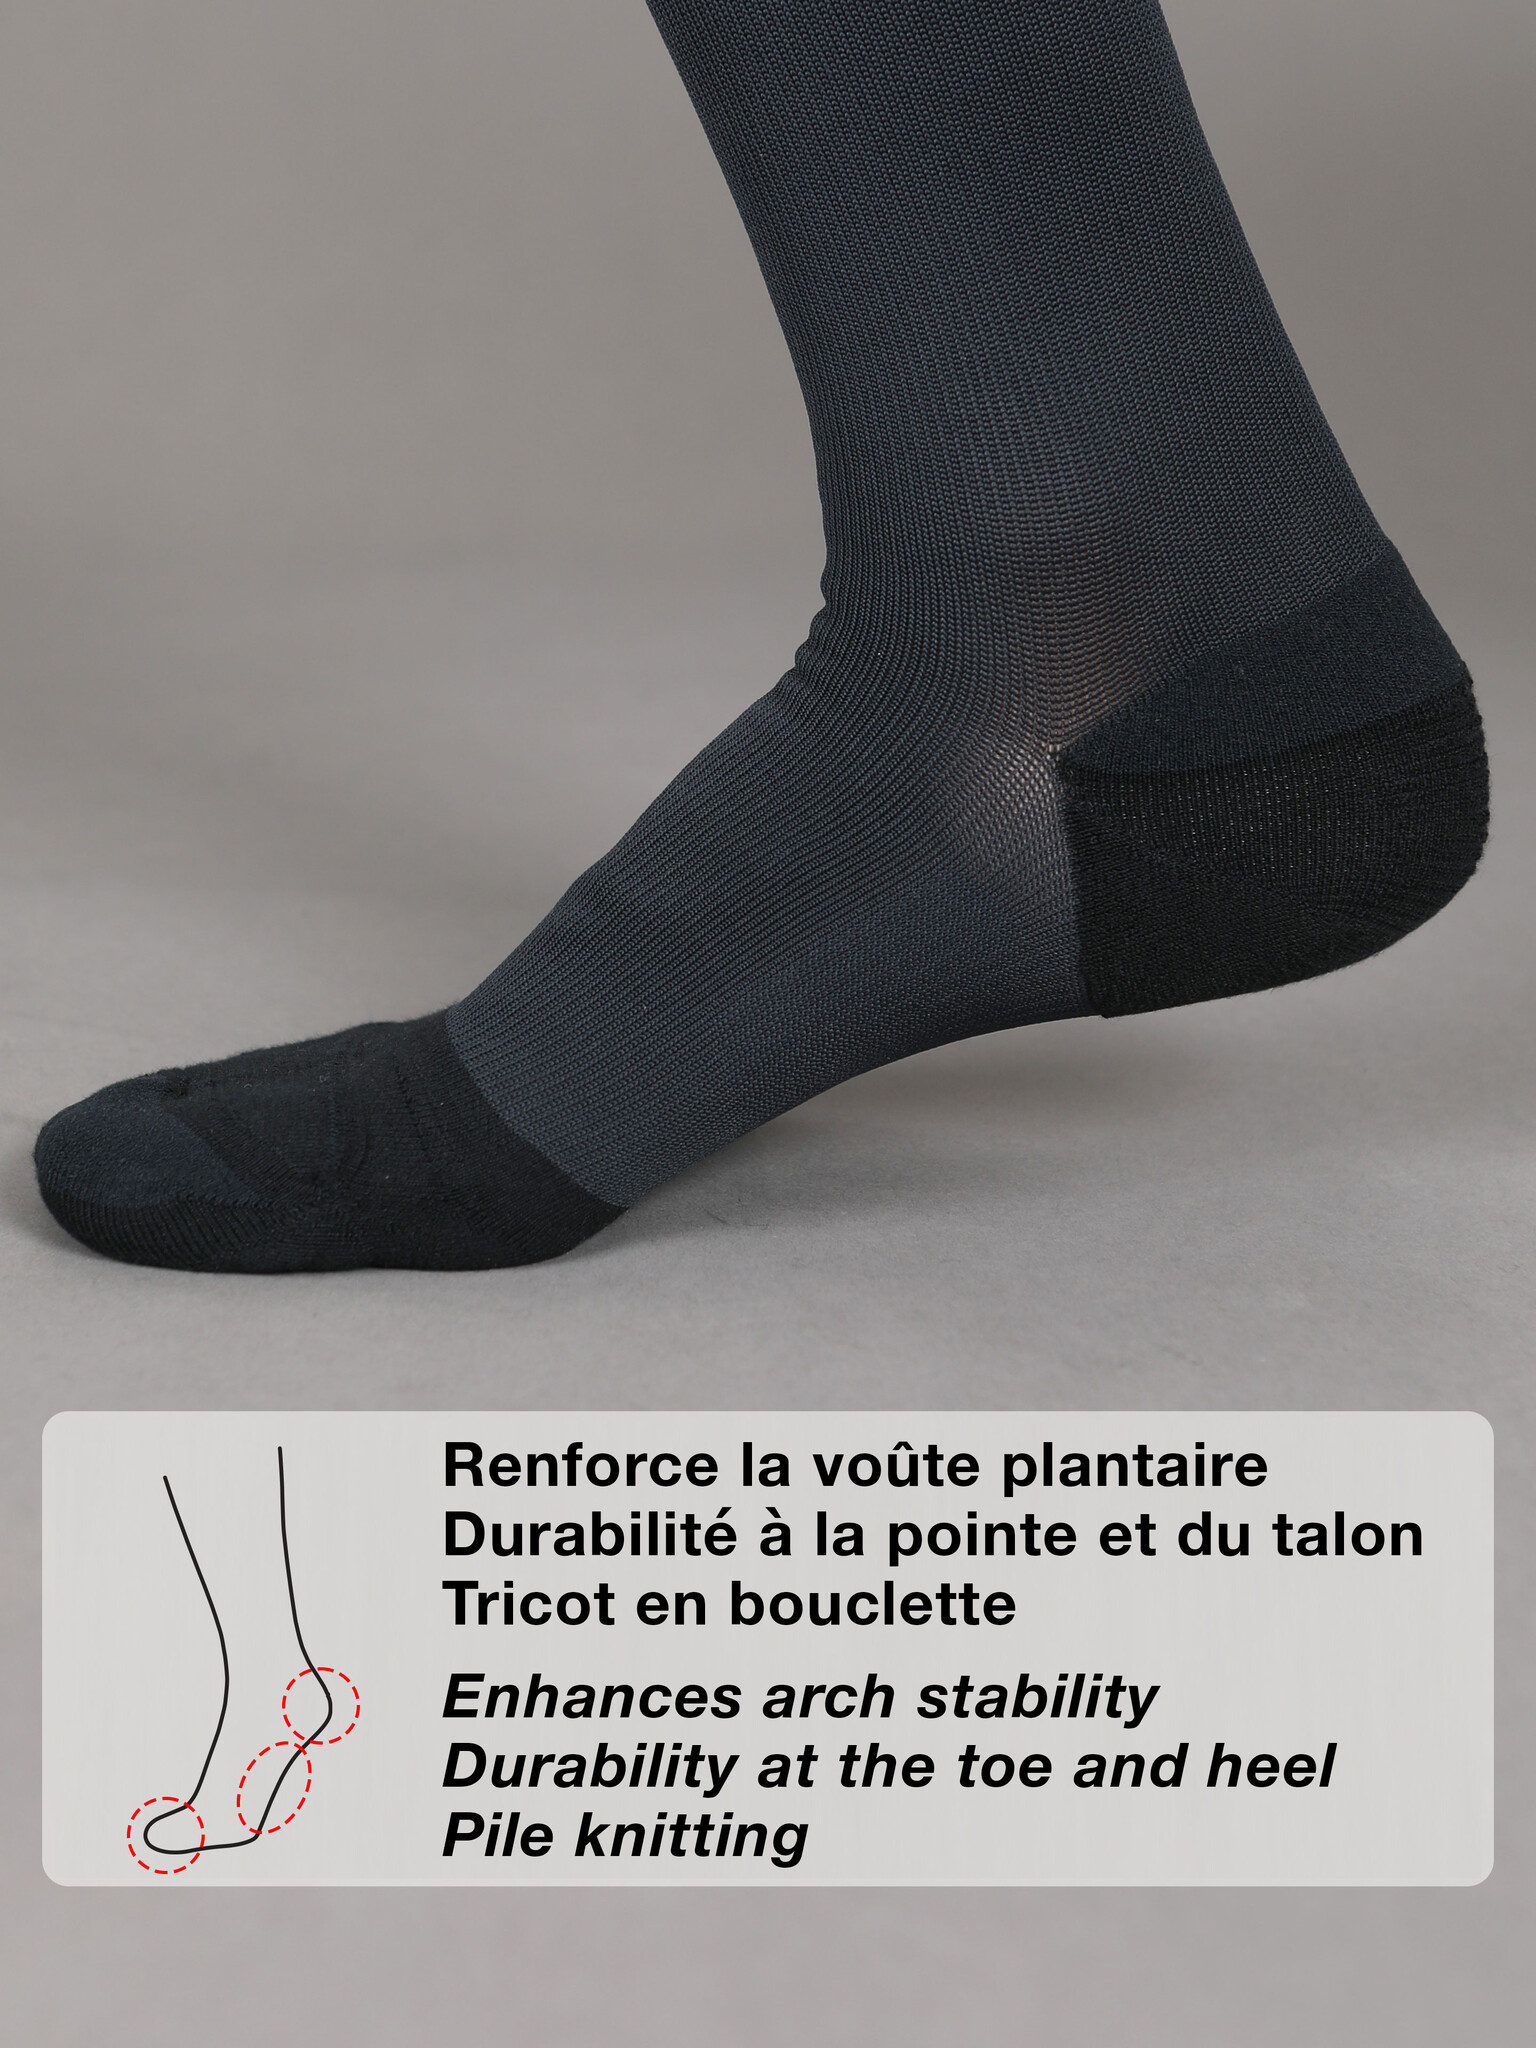 How to Keep Your Feet Healthy: Accupoint & Compression Socks – Tabio UK